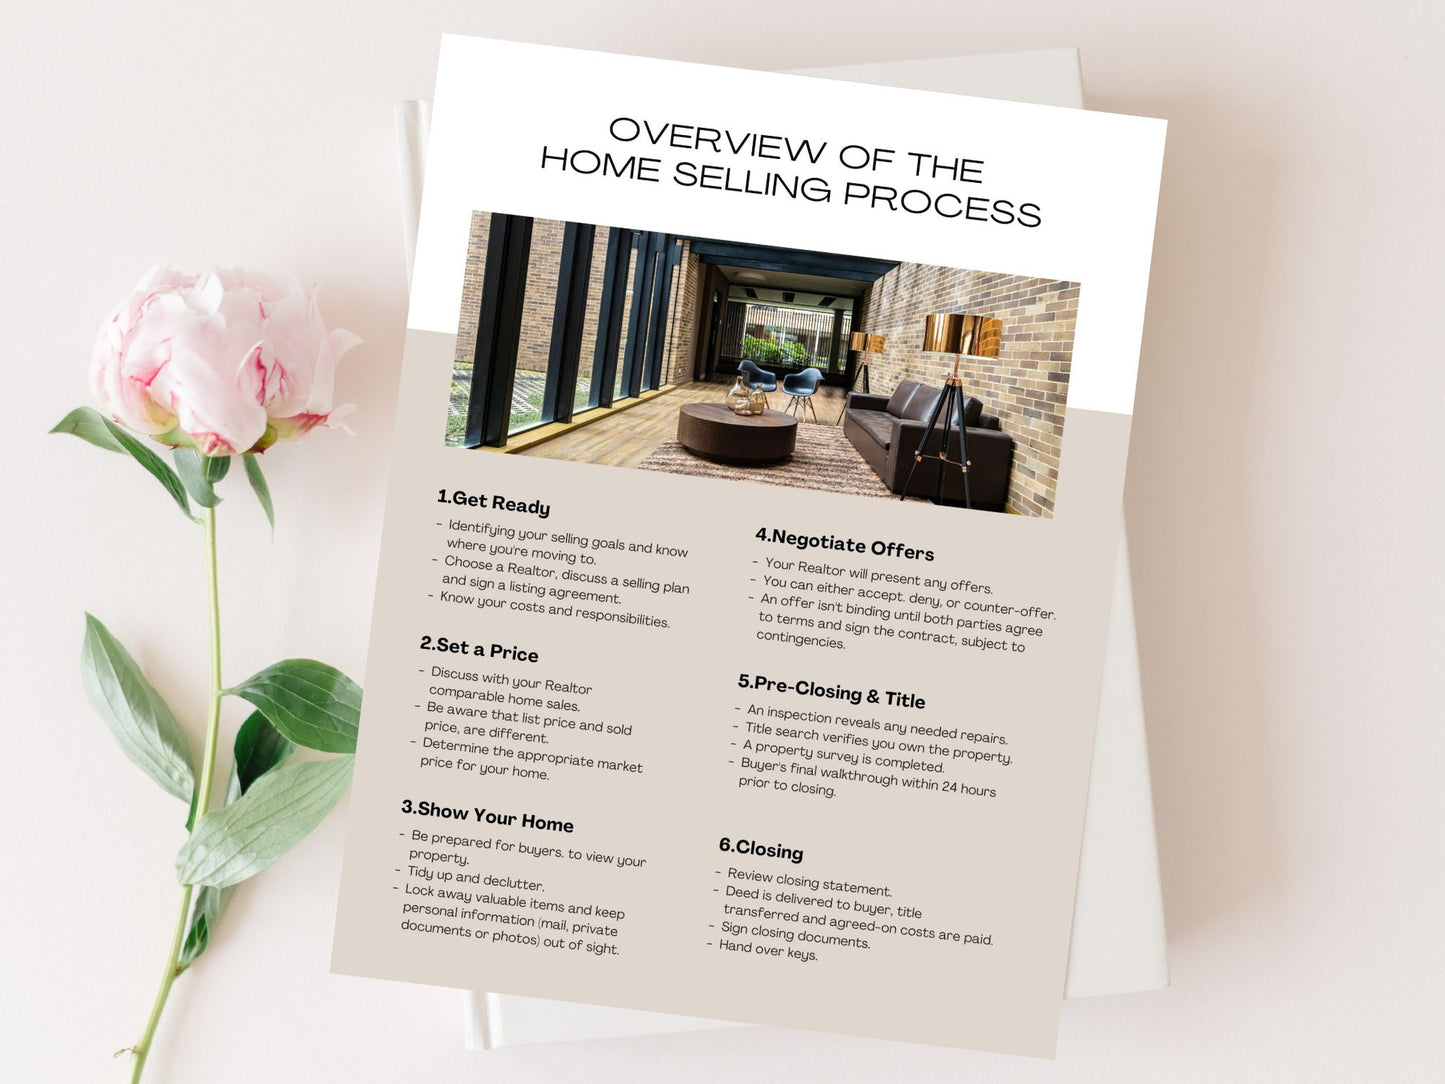 Real Estate Luxury Home Selling Process - Strategic guide for a seamless and sophisticated experience in selling high-end properties in the luxury real estate market.